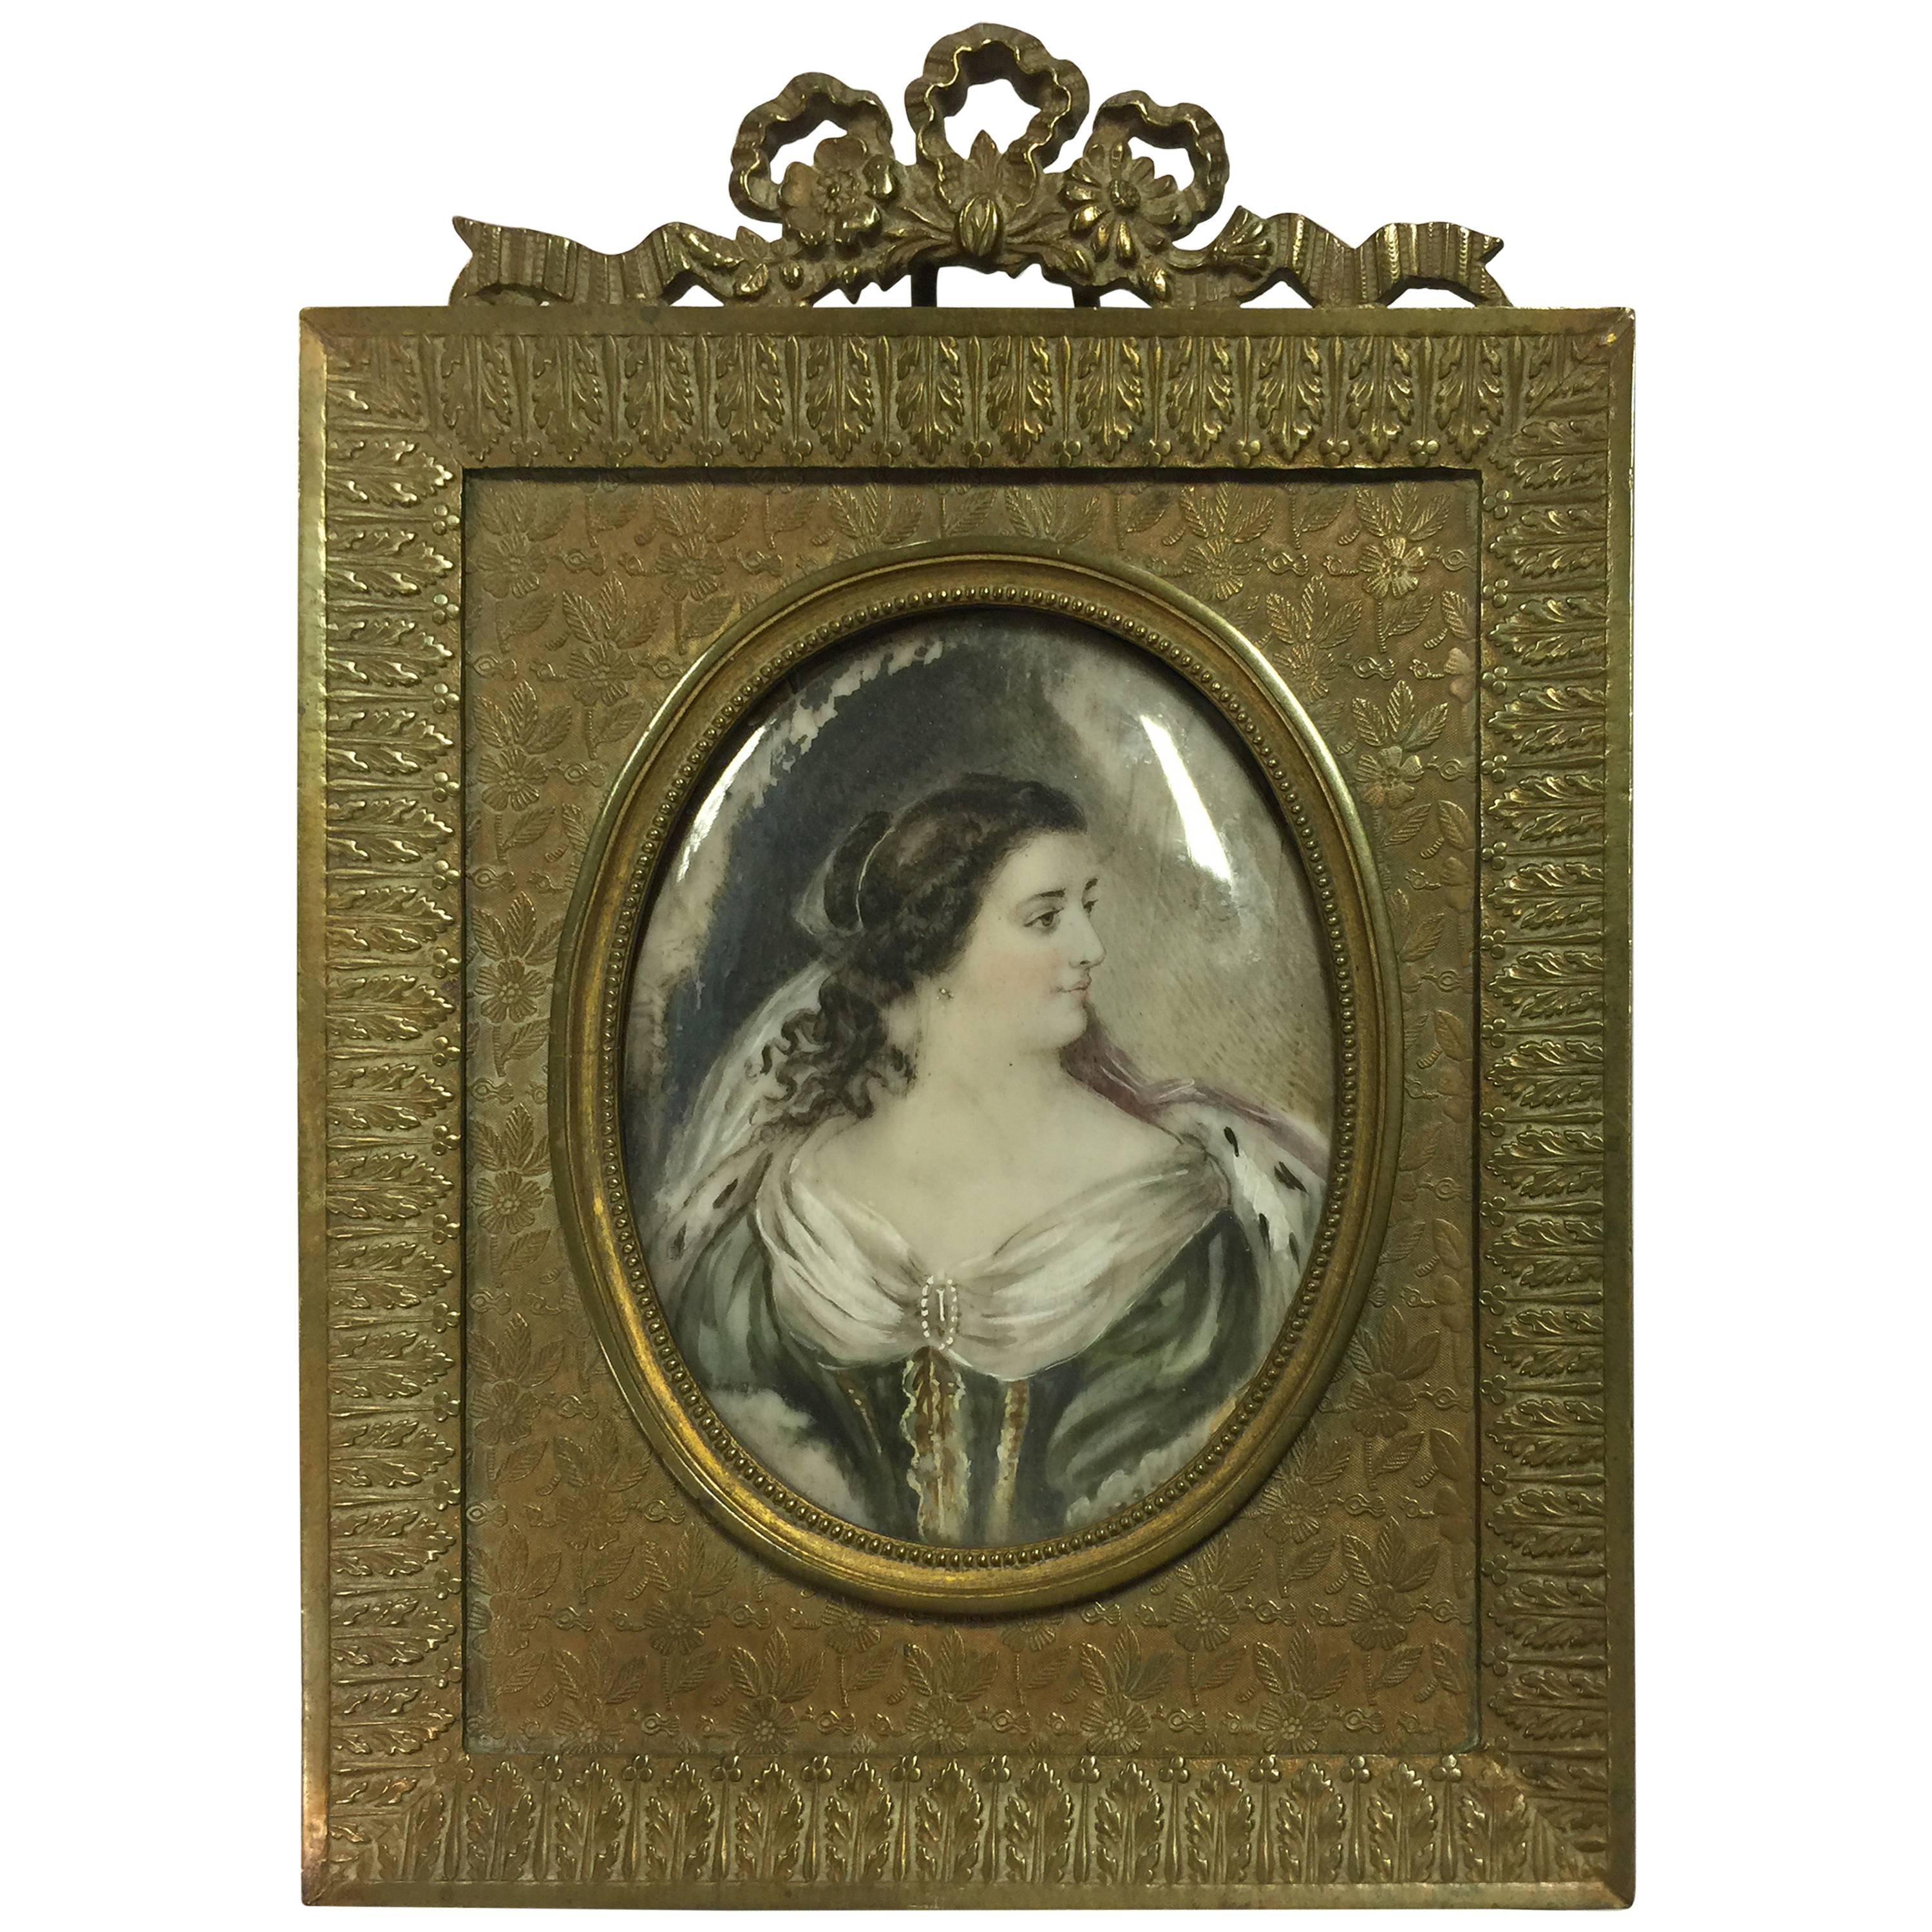 19th Century Miniature of Catherine of Russia in Ormolu Standing Frame